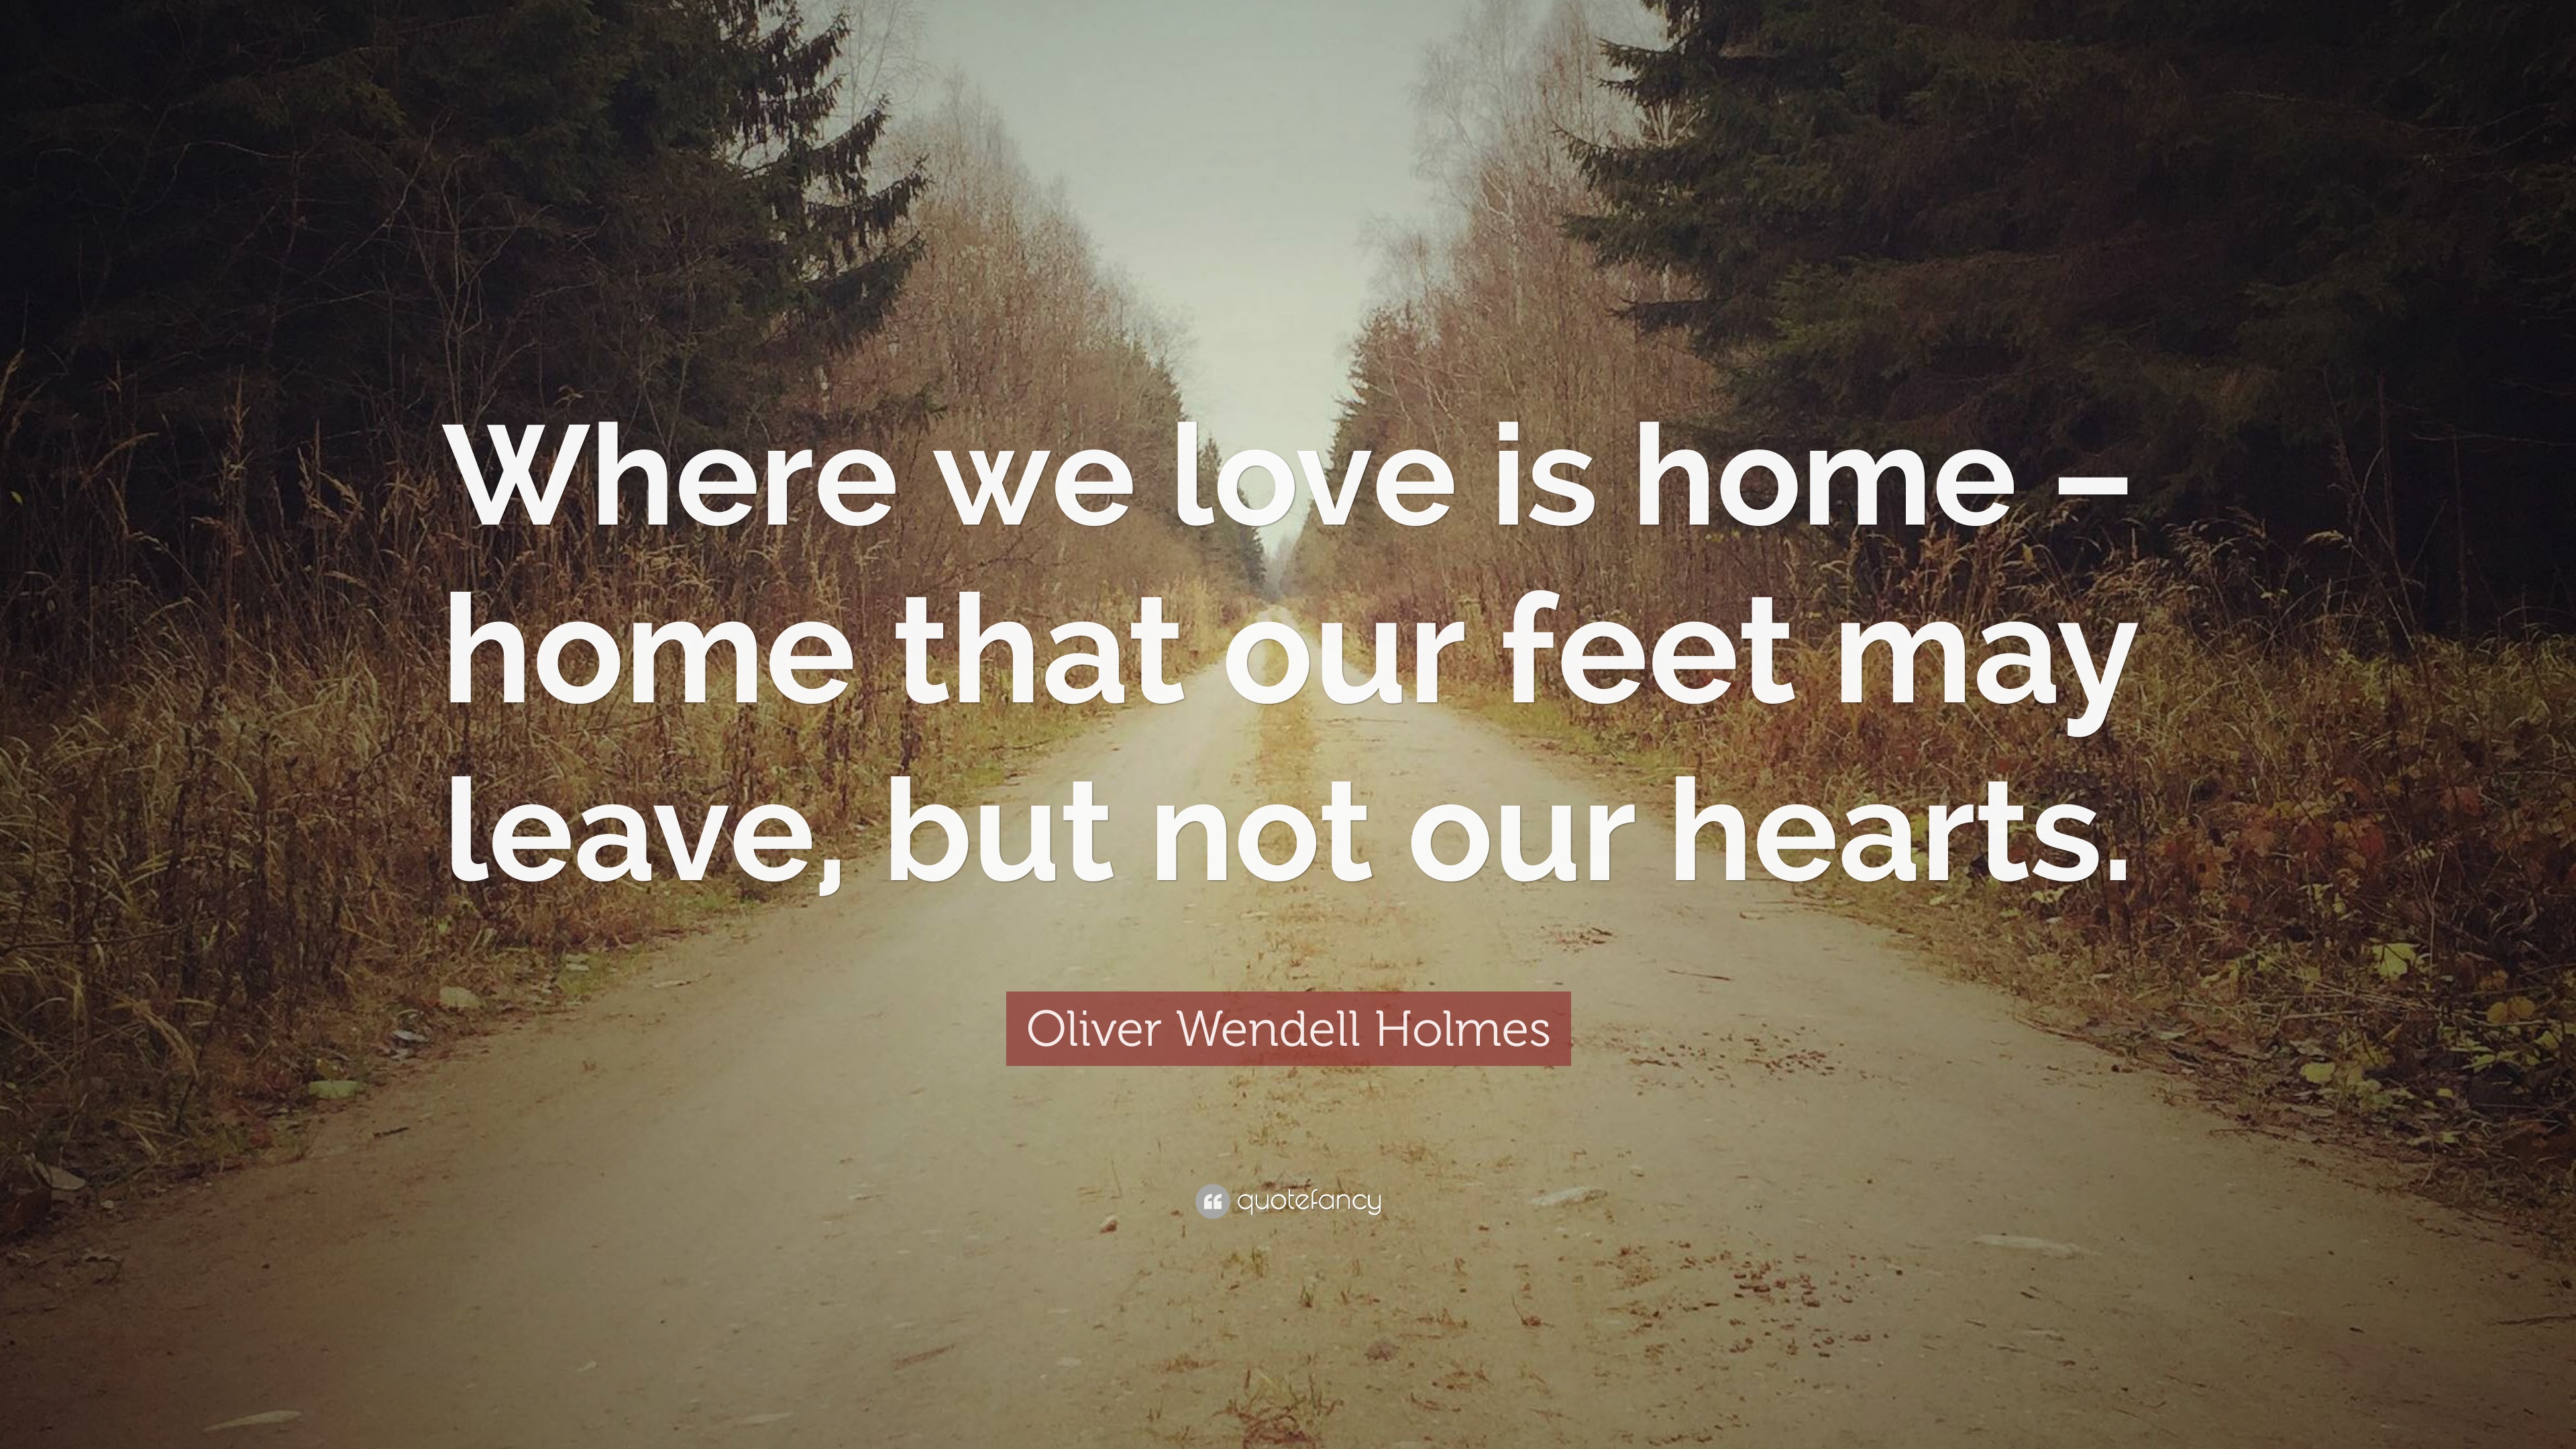 417497-Oliver-Wendell-Holmes-Quote-Where-we-love-is-home-home-that-our.jpg